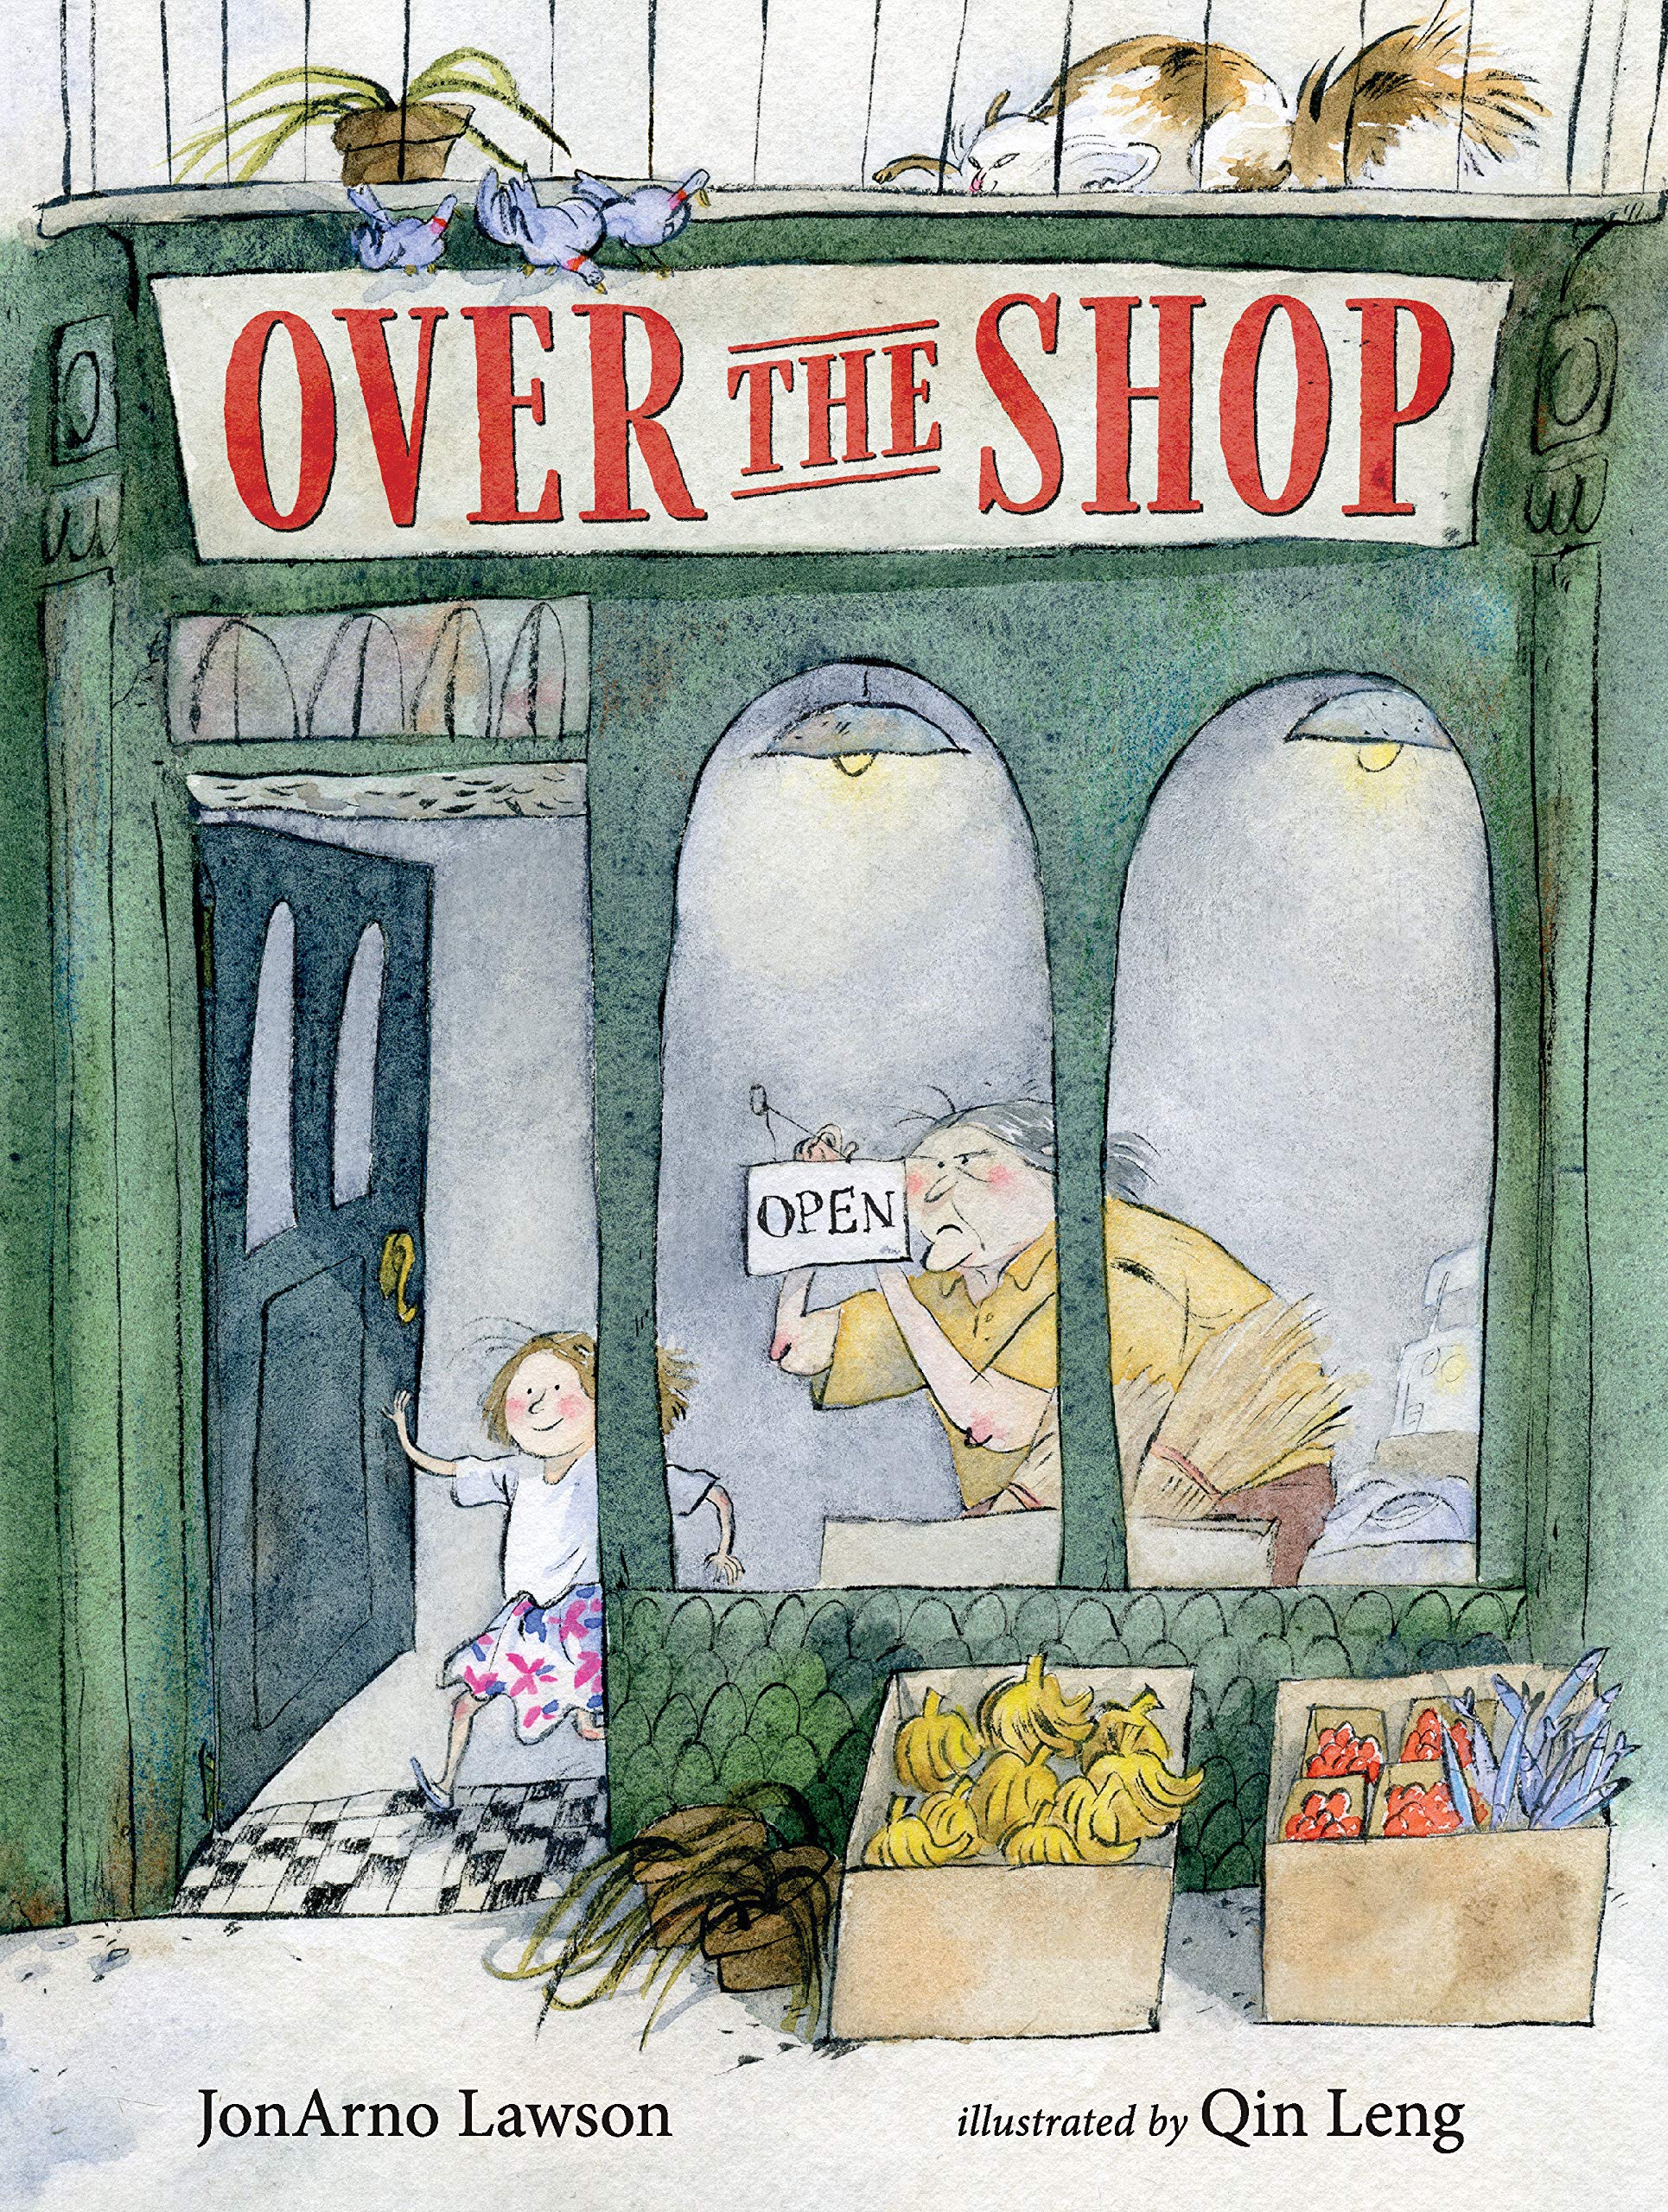 Jonarno Lawson and Qin Leng's Over the Shop book cover